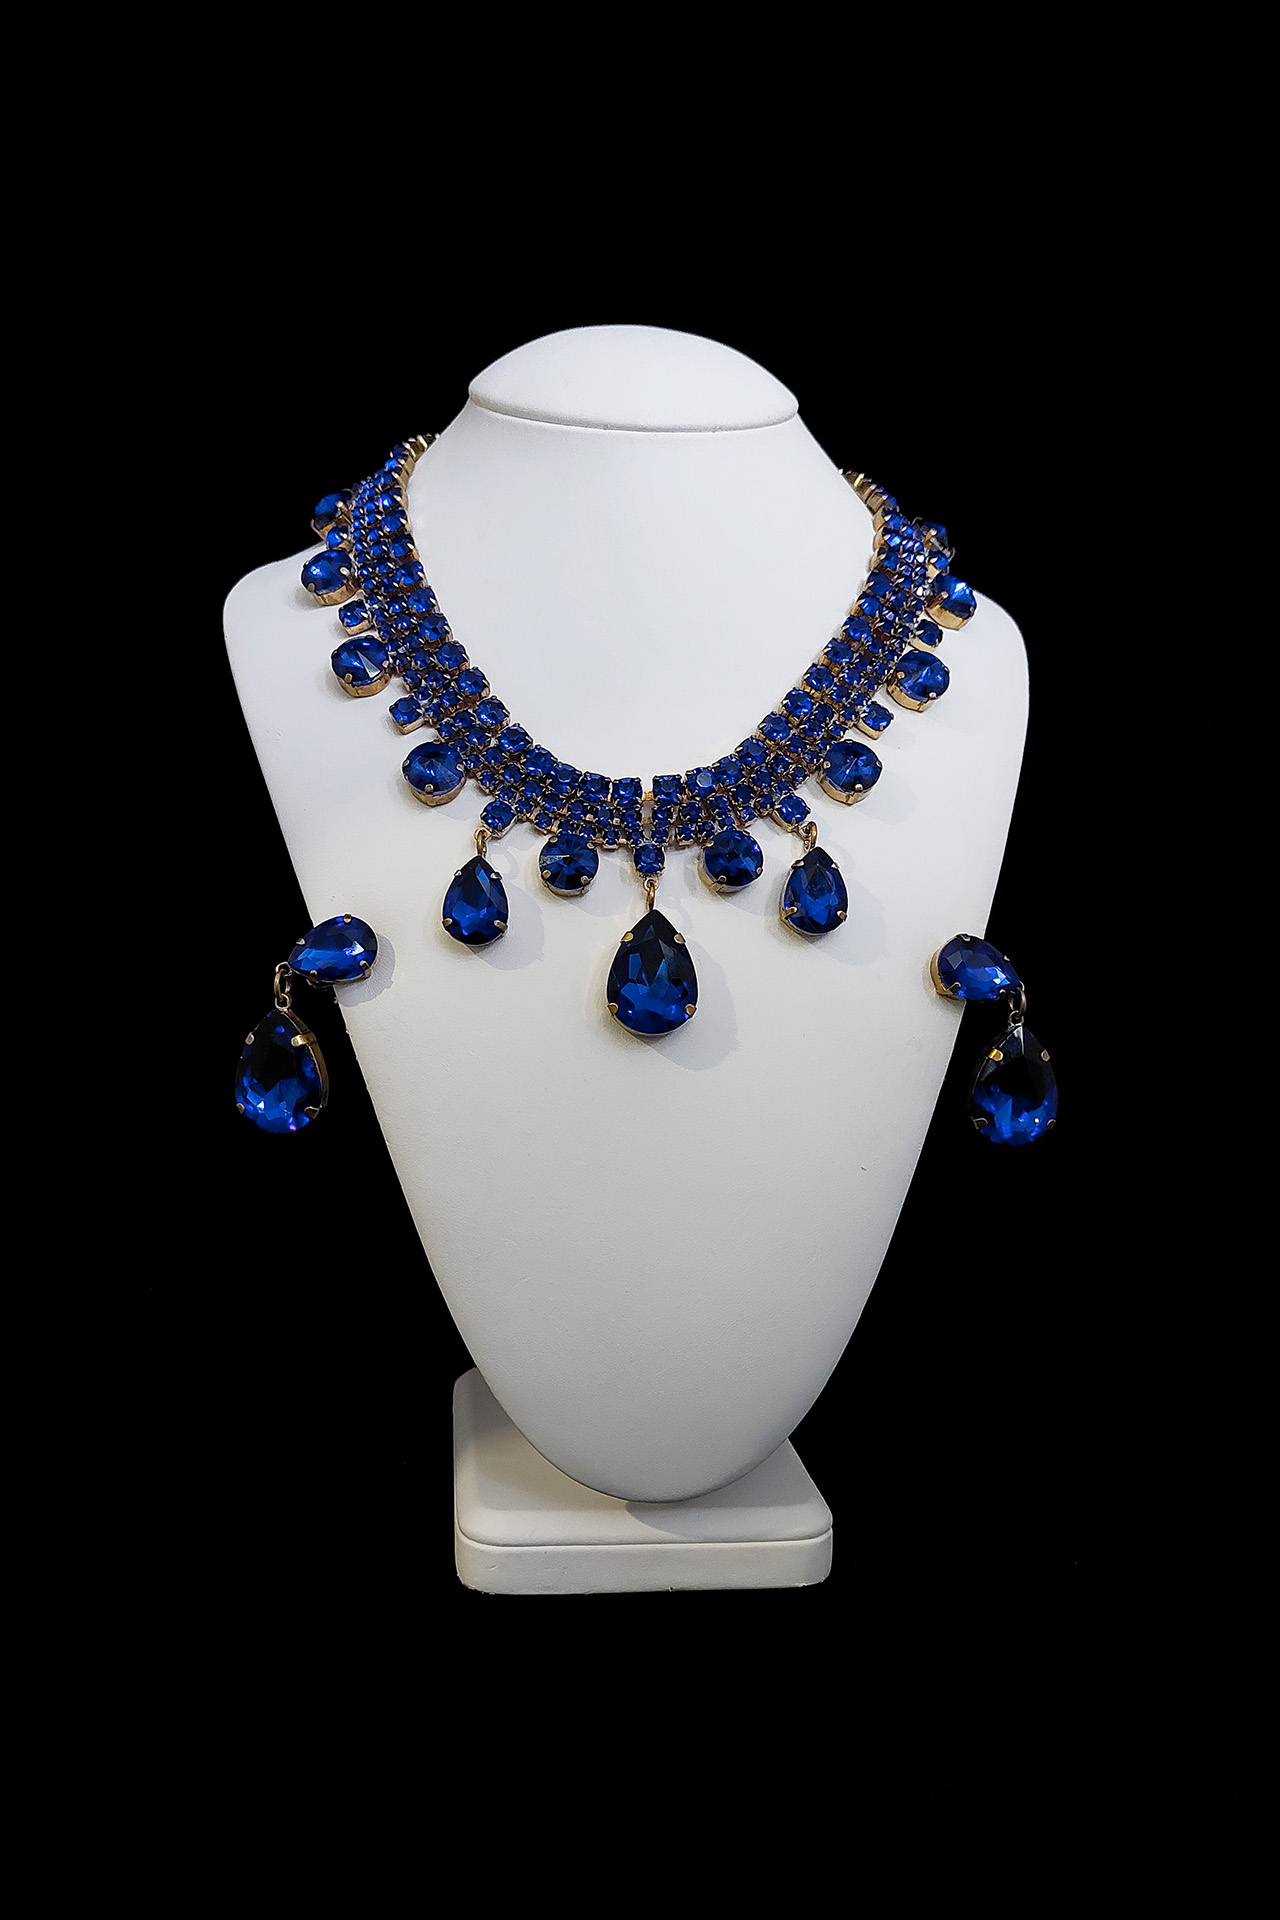 Handmade necklace and earrings Raindrops from blue rhinestones